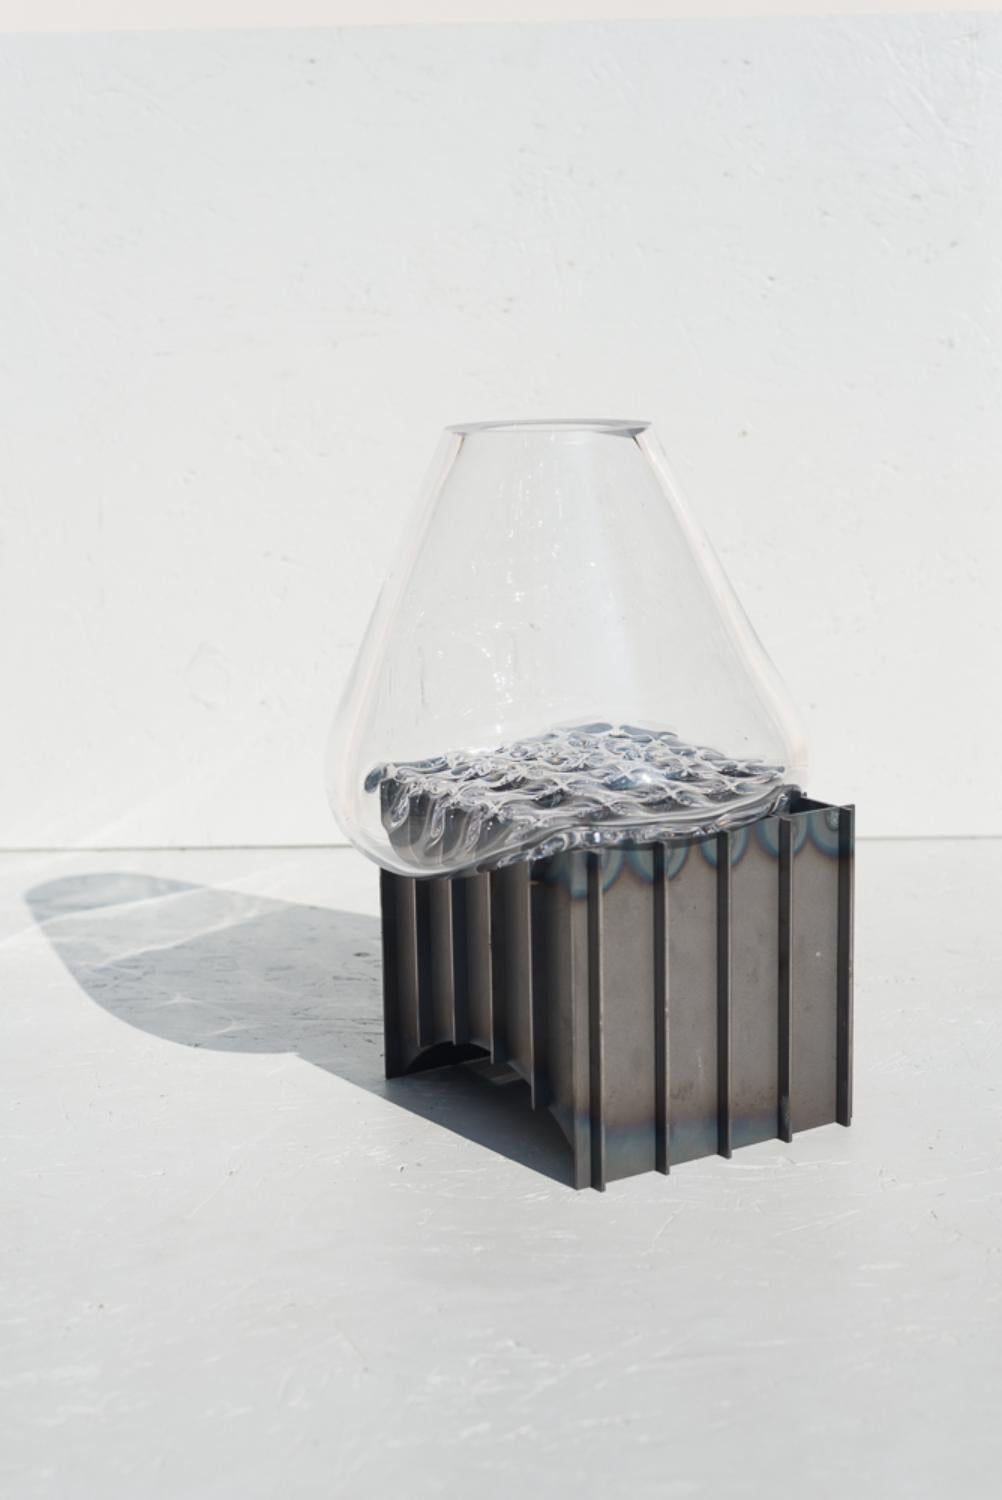 Set Of 4 Clear Grid Table Vase by Studio Thier & van Daalen
Dimensions: W 30 x D 30 x H 35cm
Materials: Steel, Glass

The studio was keen to find a way to display the fluidity of glass. Therefore they sought the contrast between the industrial